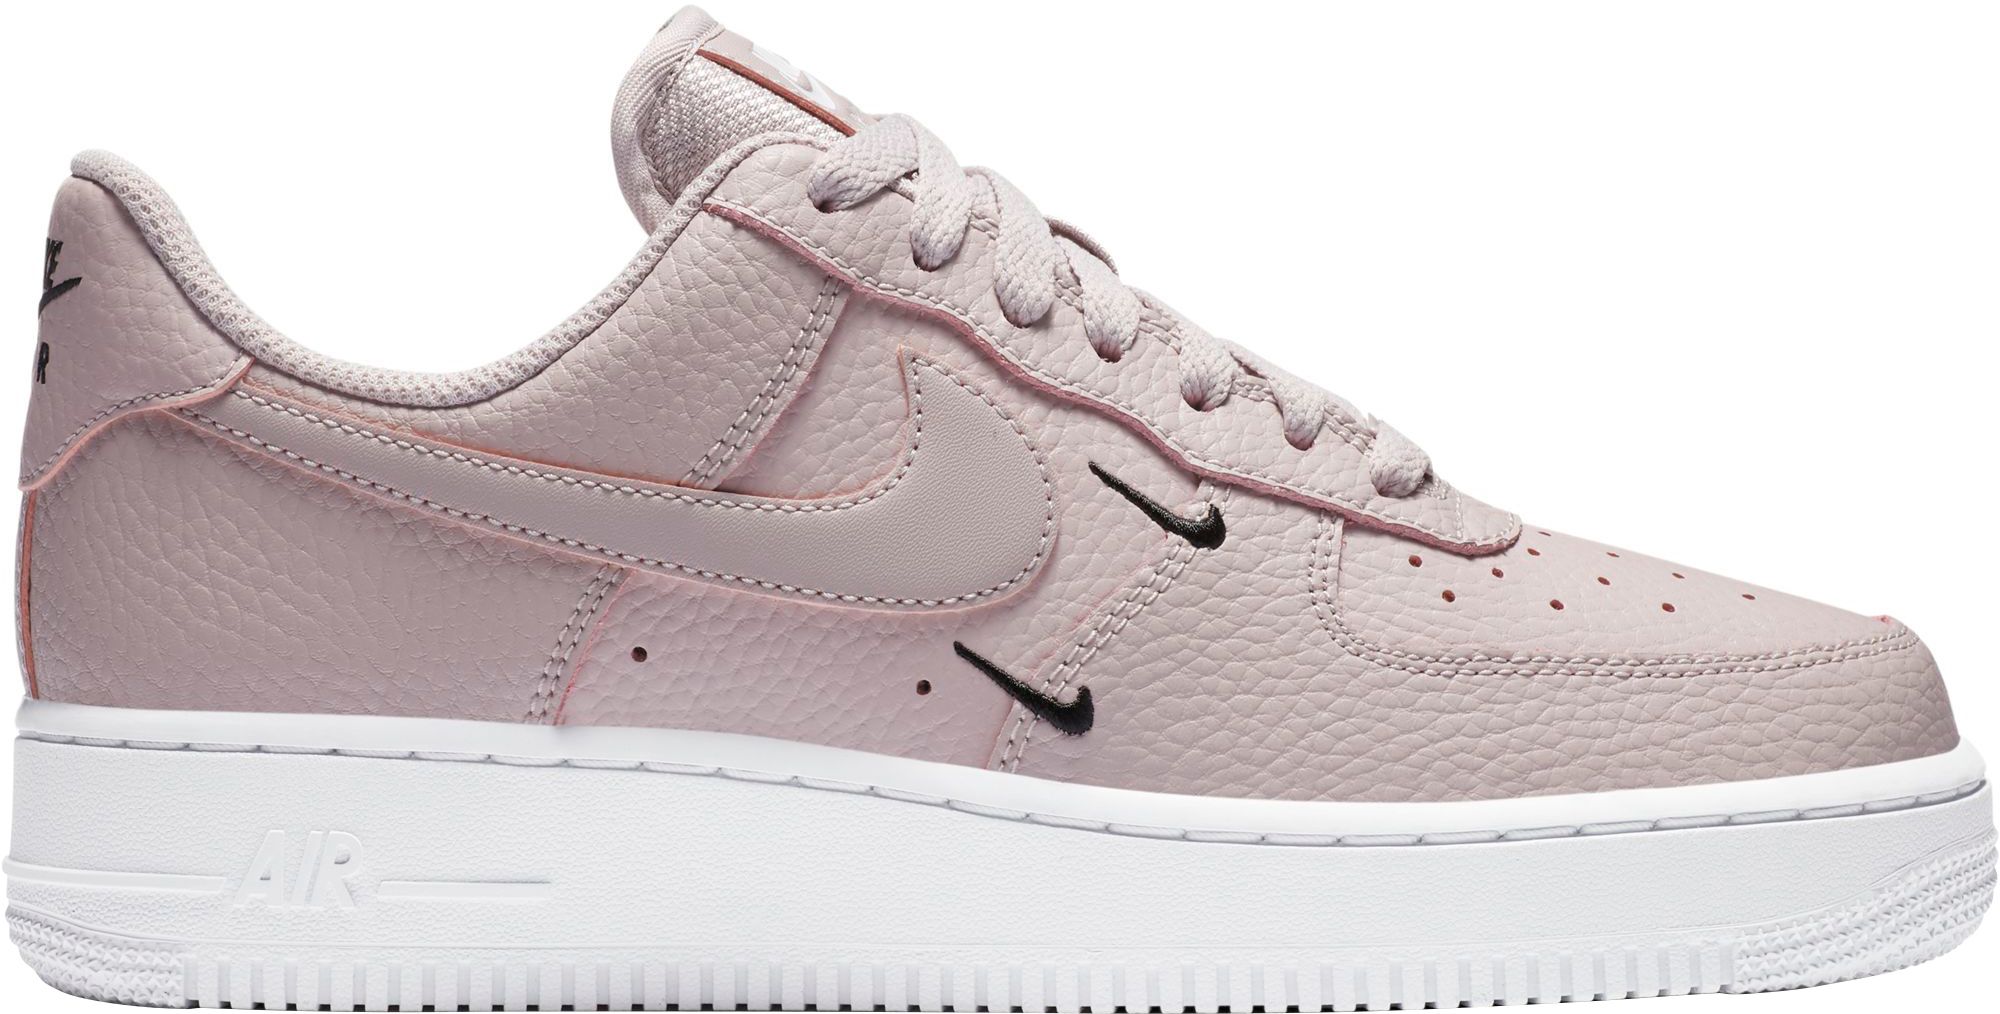 Nike Women's Air Force 1 '07 Shoes 